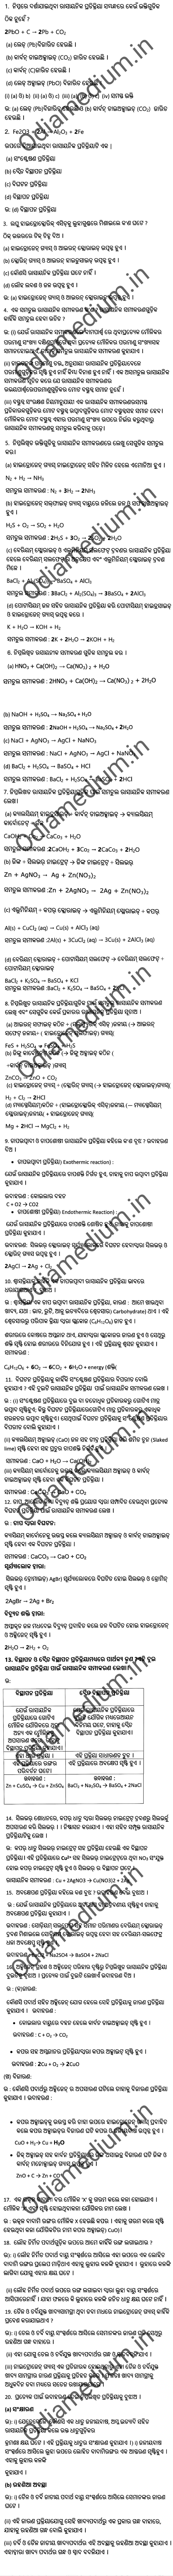 Odisha class 10 Physical science chapter 1 question answer